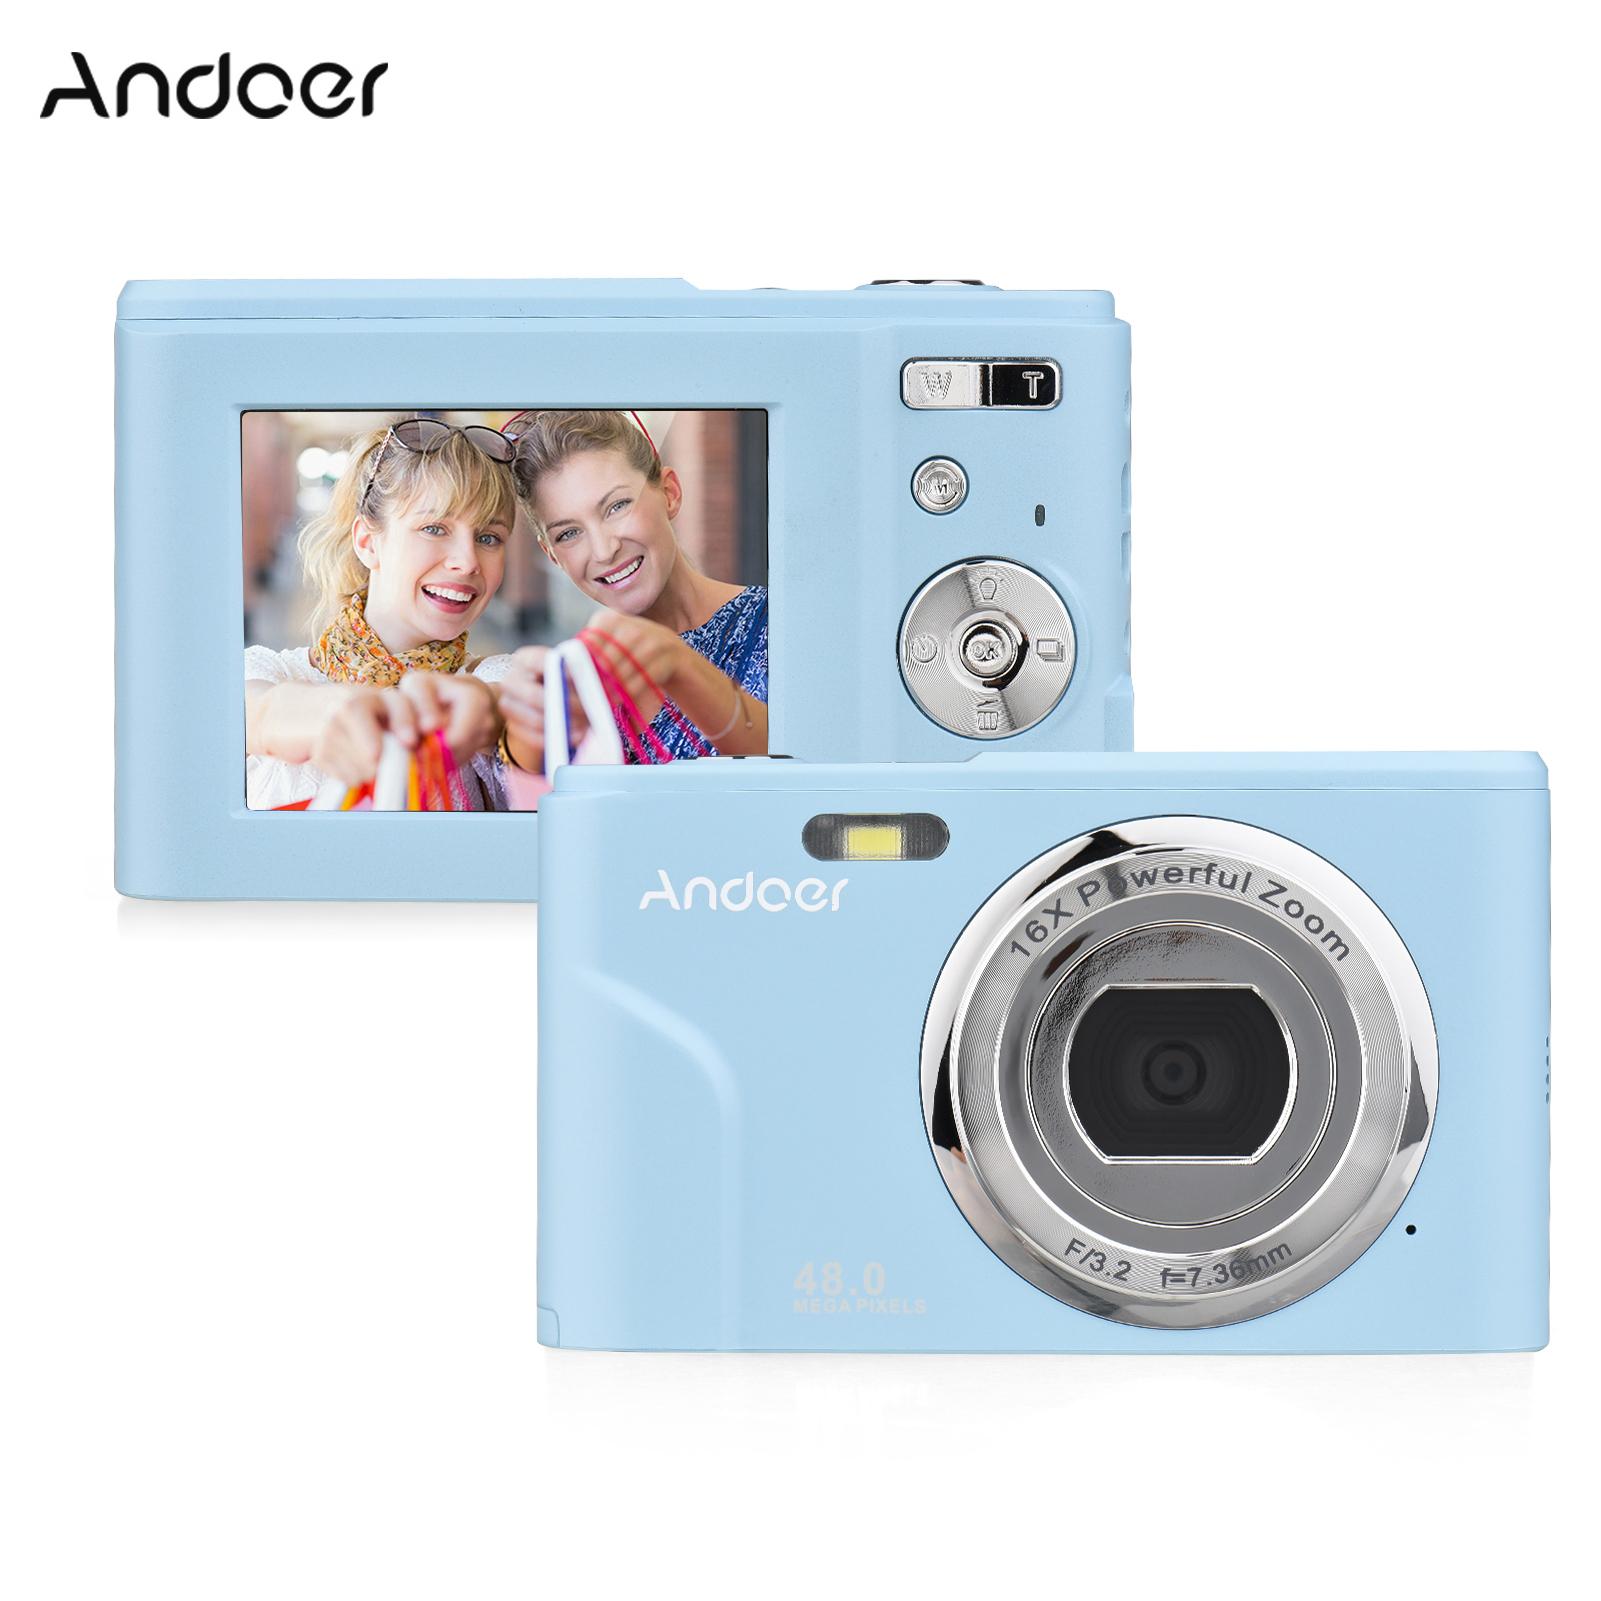 Andoer Portable Digital Camera 48MP 1080P 2.4-inch IPS Screen 16X Zoom Auto Focus Self-Timer Face